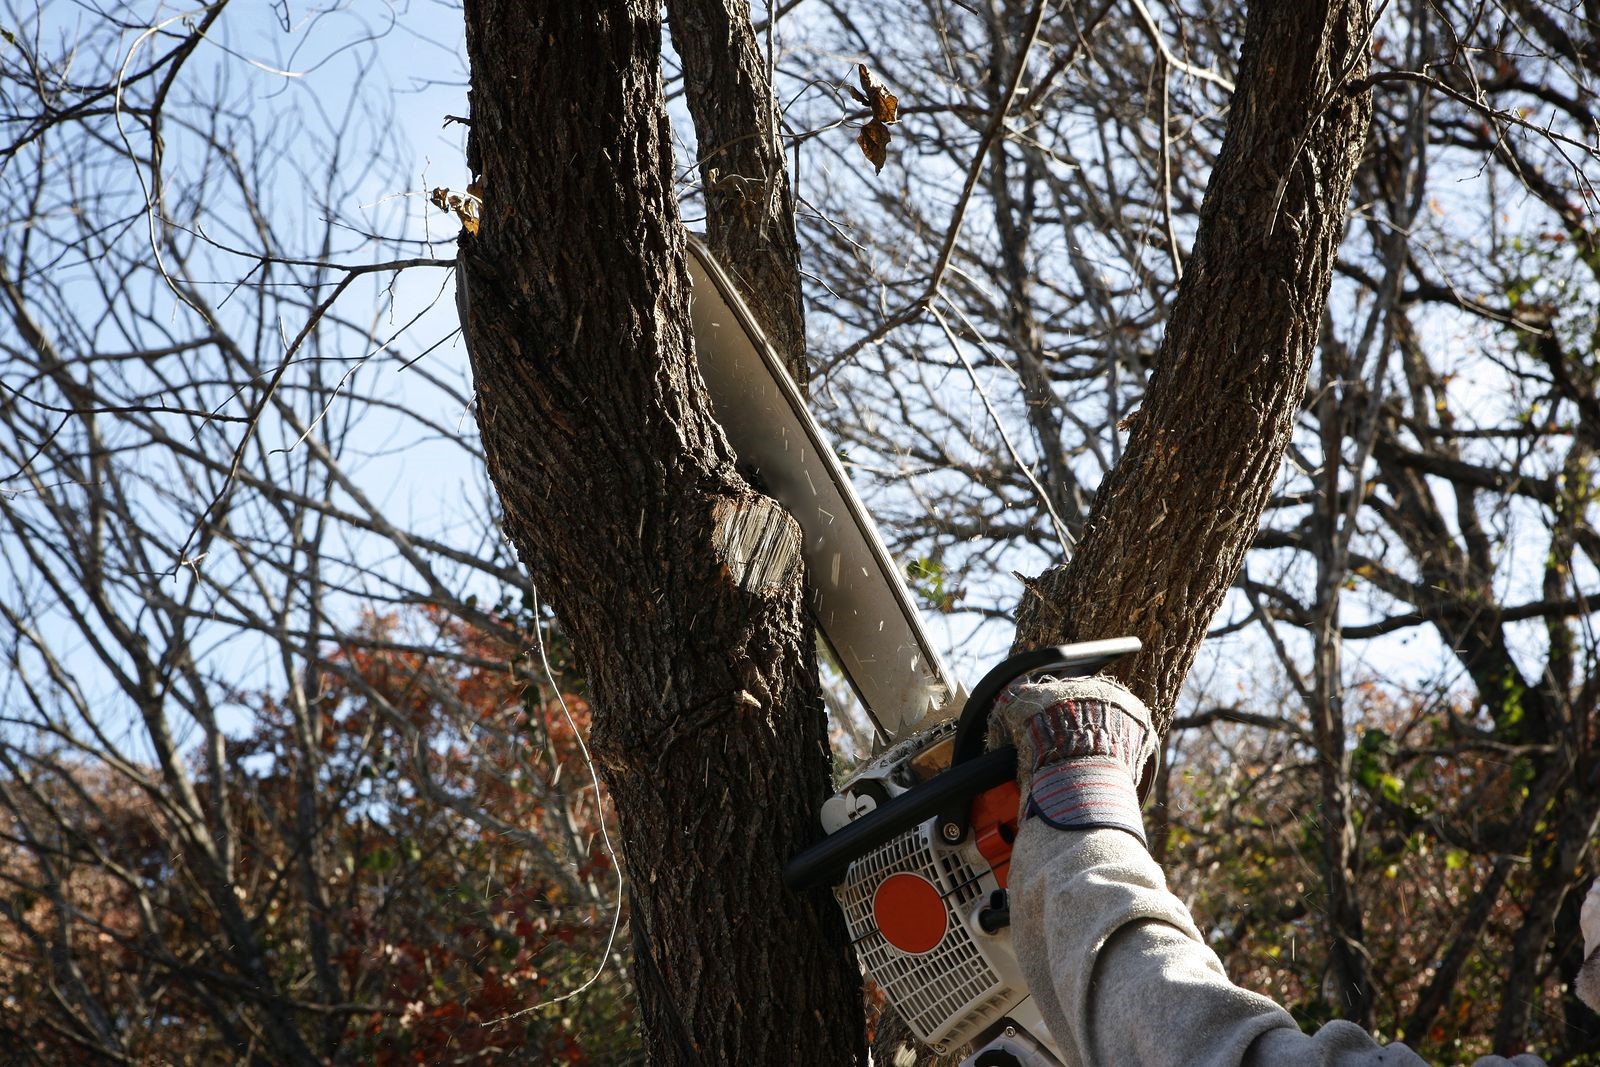 A Tree Service Firm in Marietta, GA Helps Spot and Remove Dying Trees